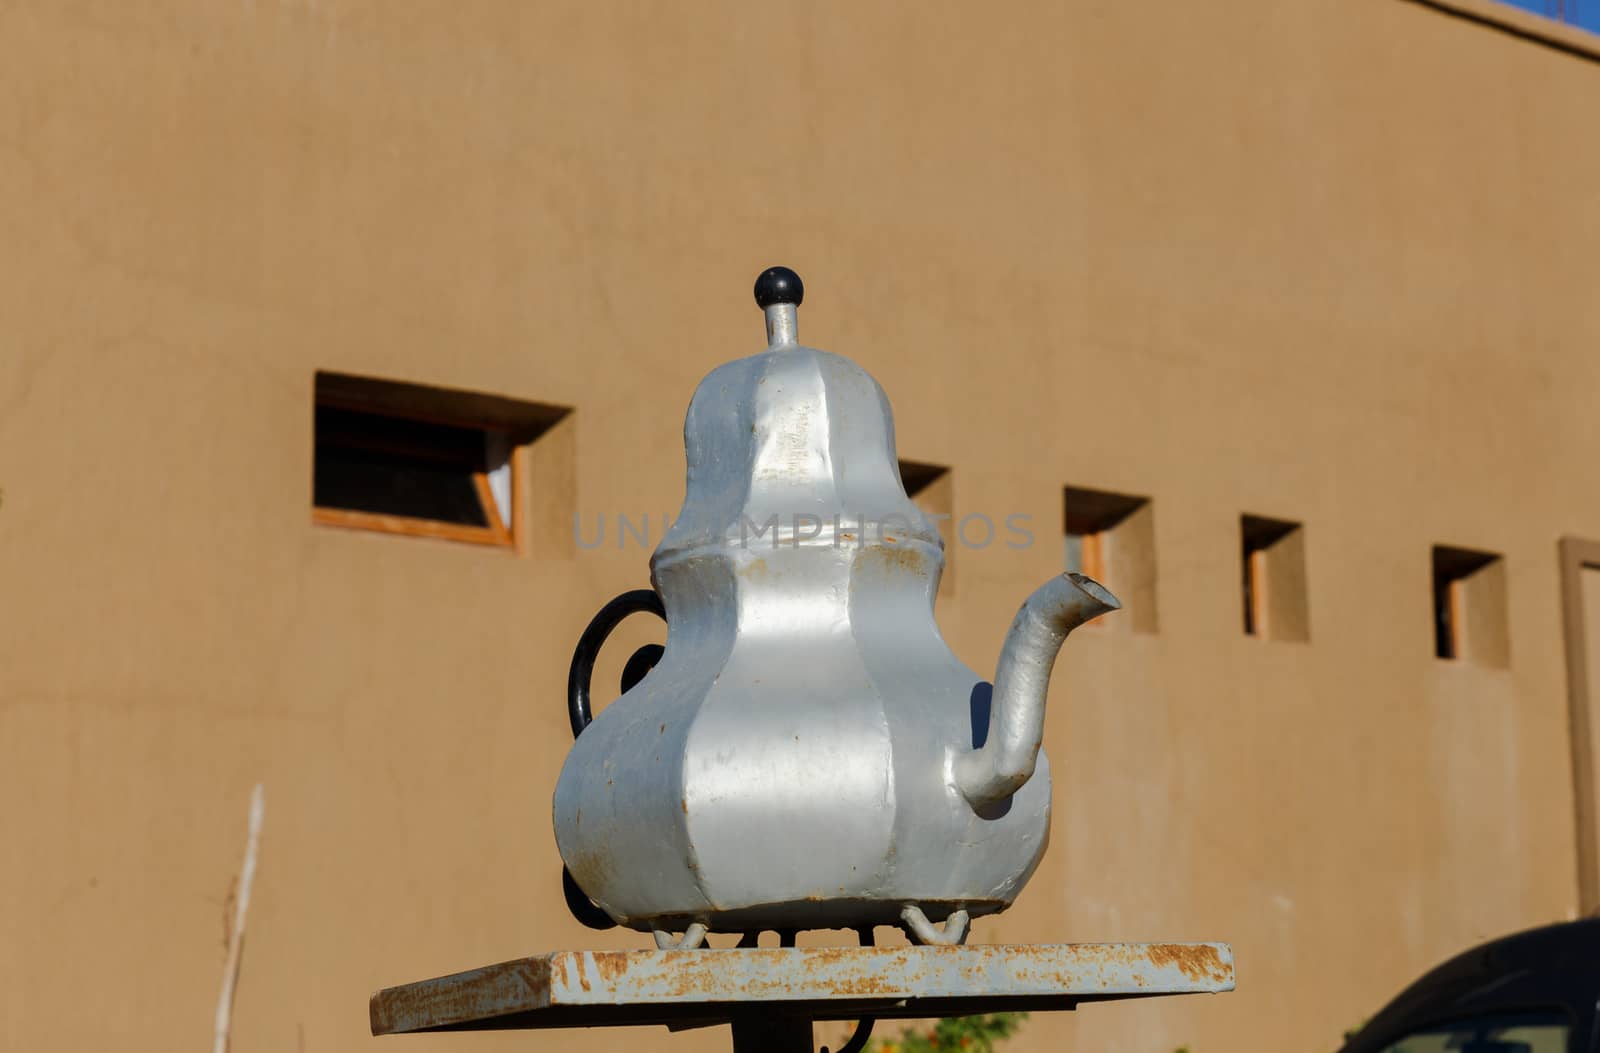 traditional Moroccan teapot standing on the sidelines at the cafe